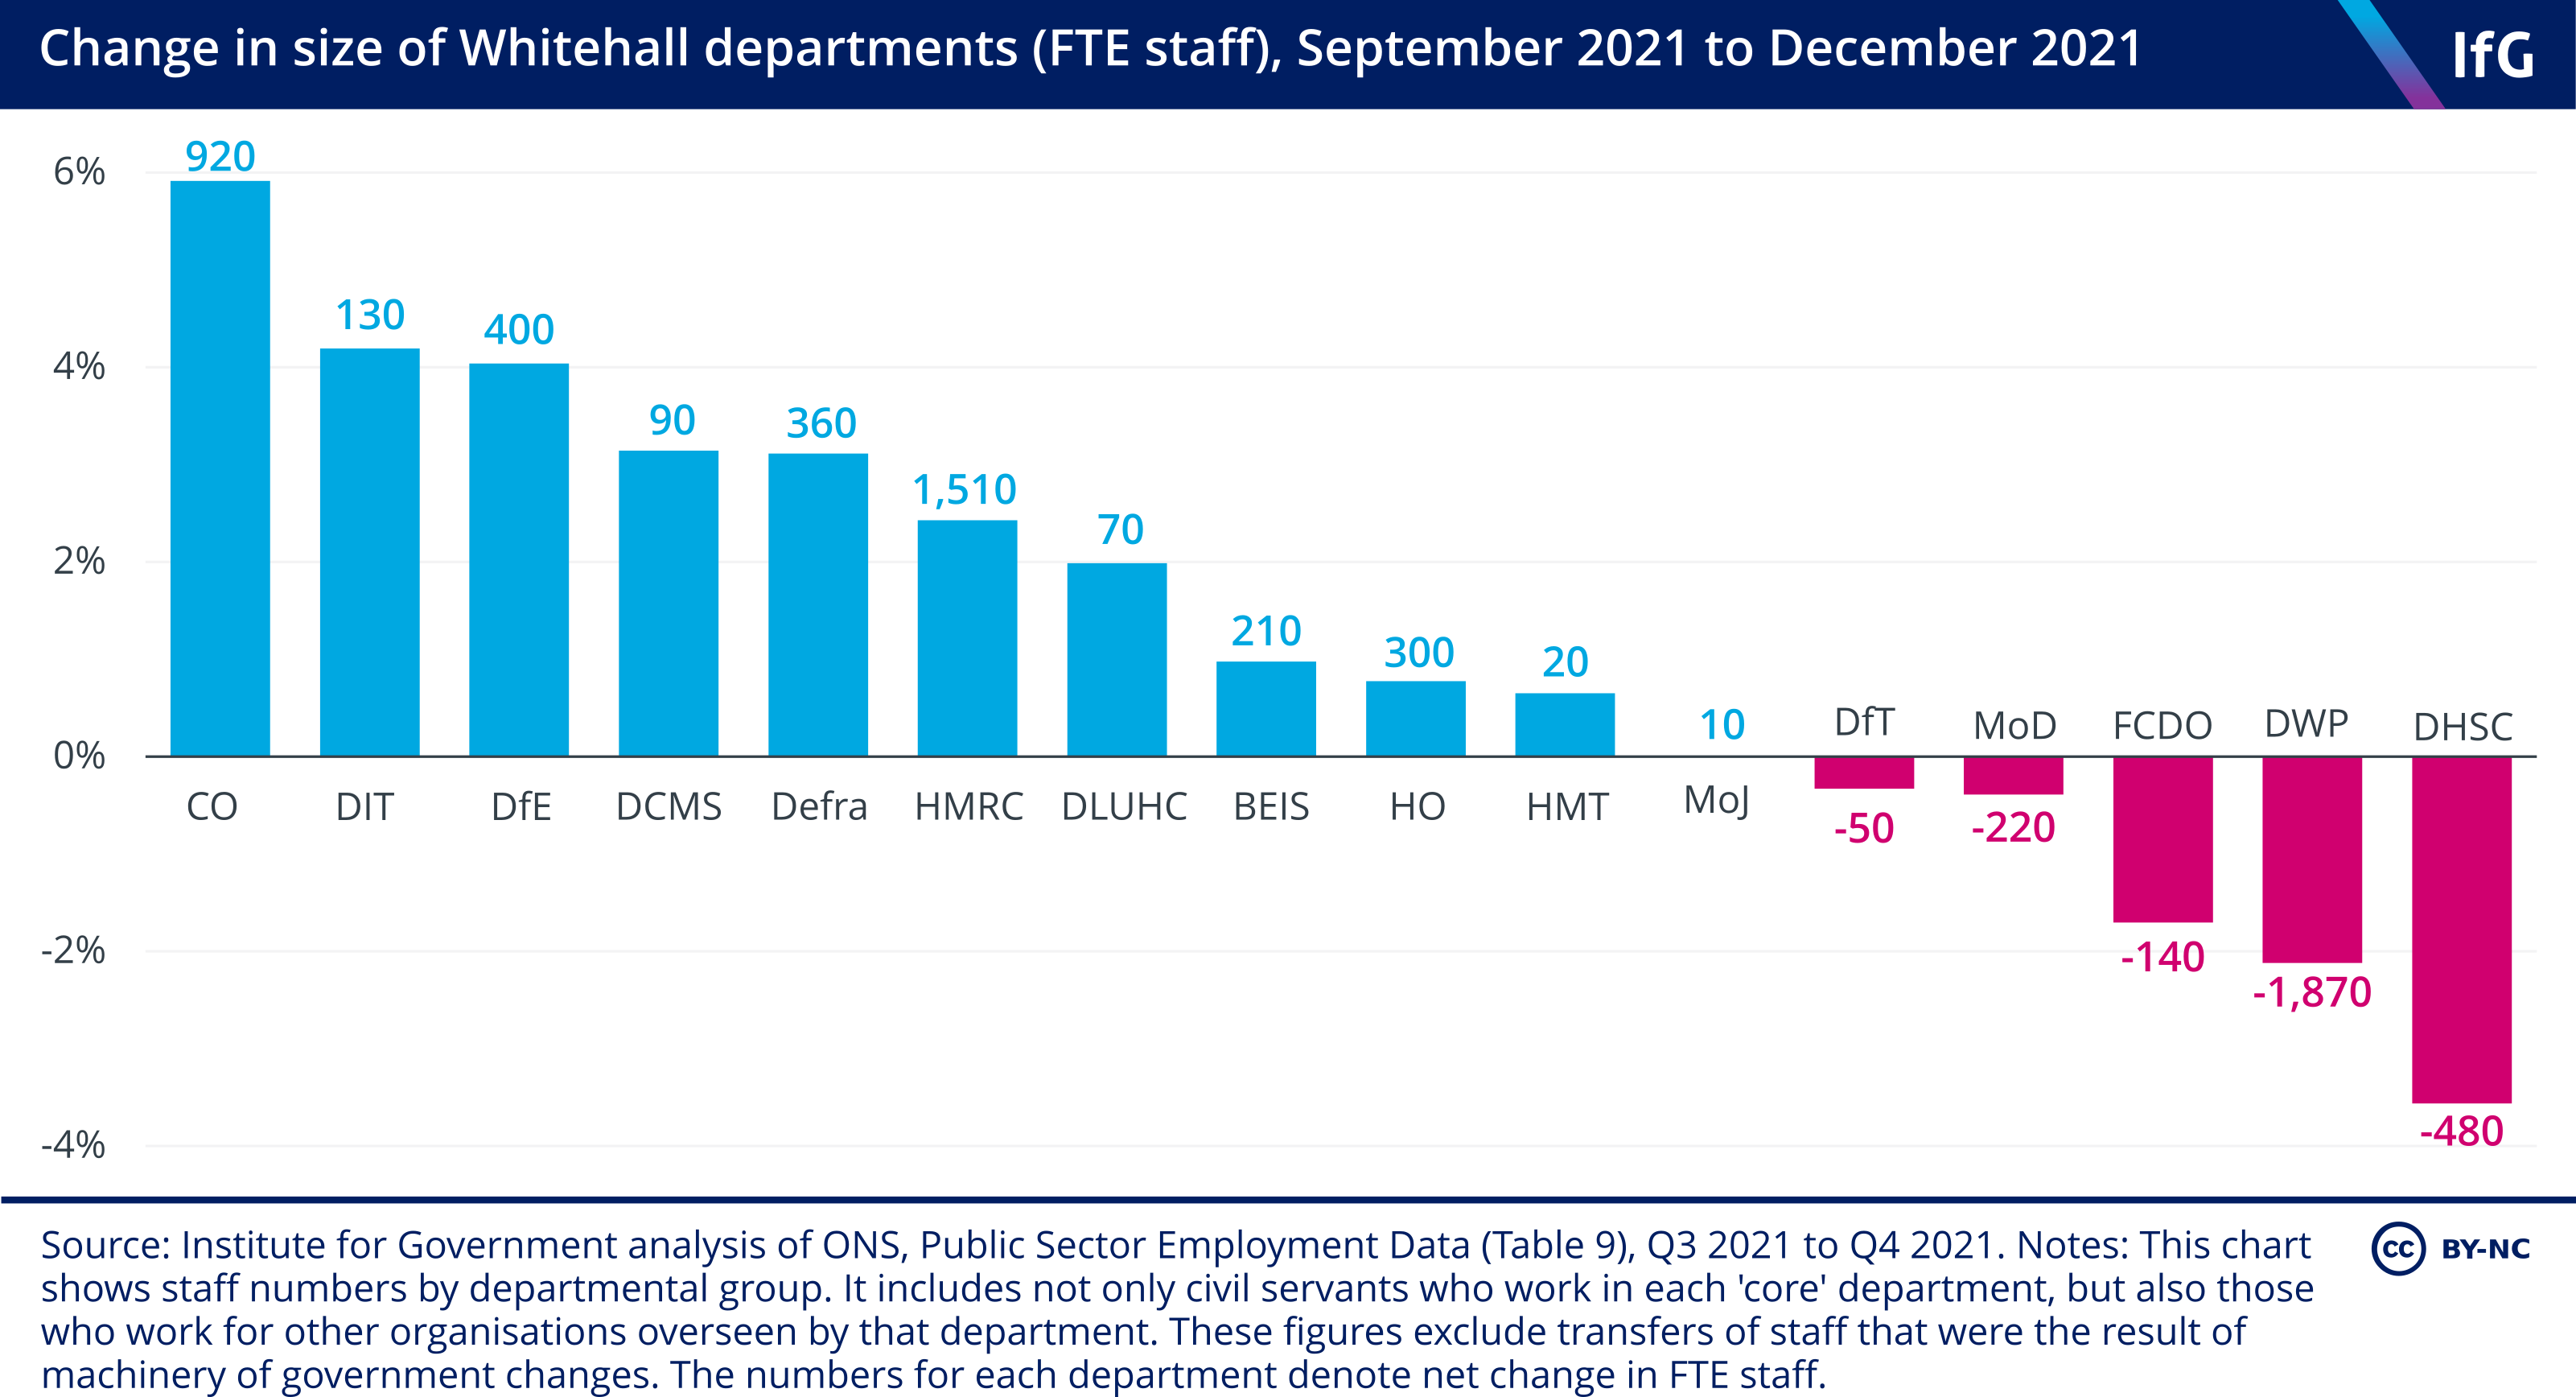 Change in size of Whitehall departments (FTE staff), September 2021 to December 2021